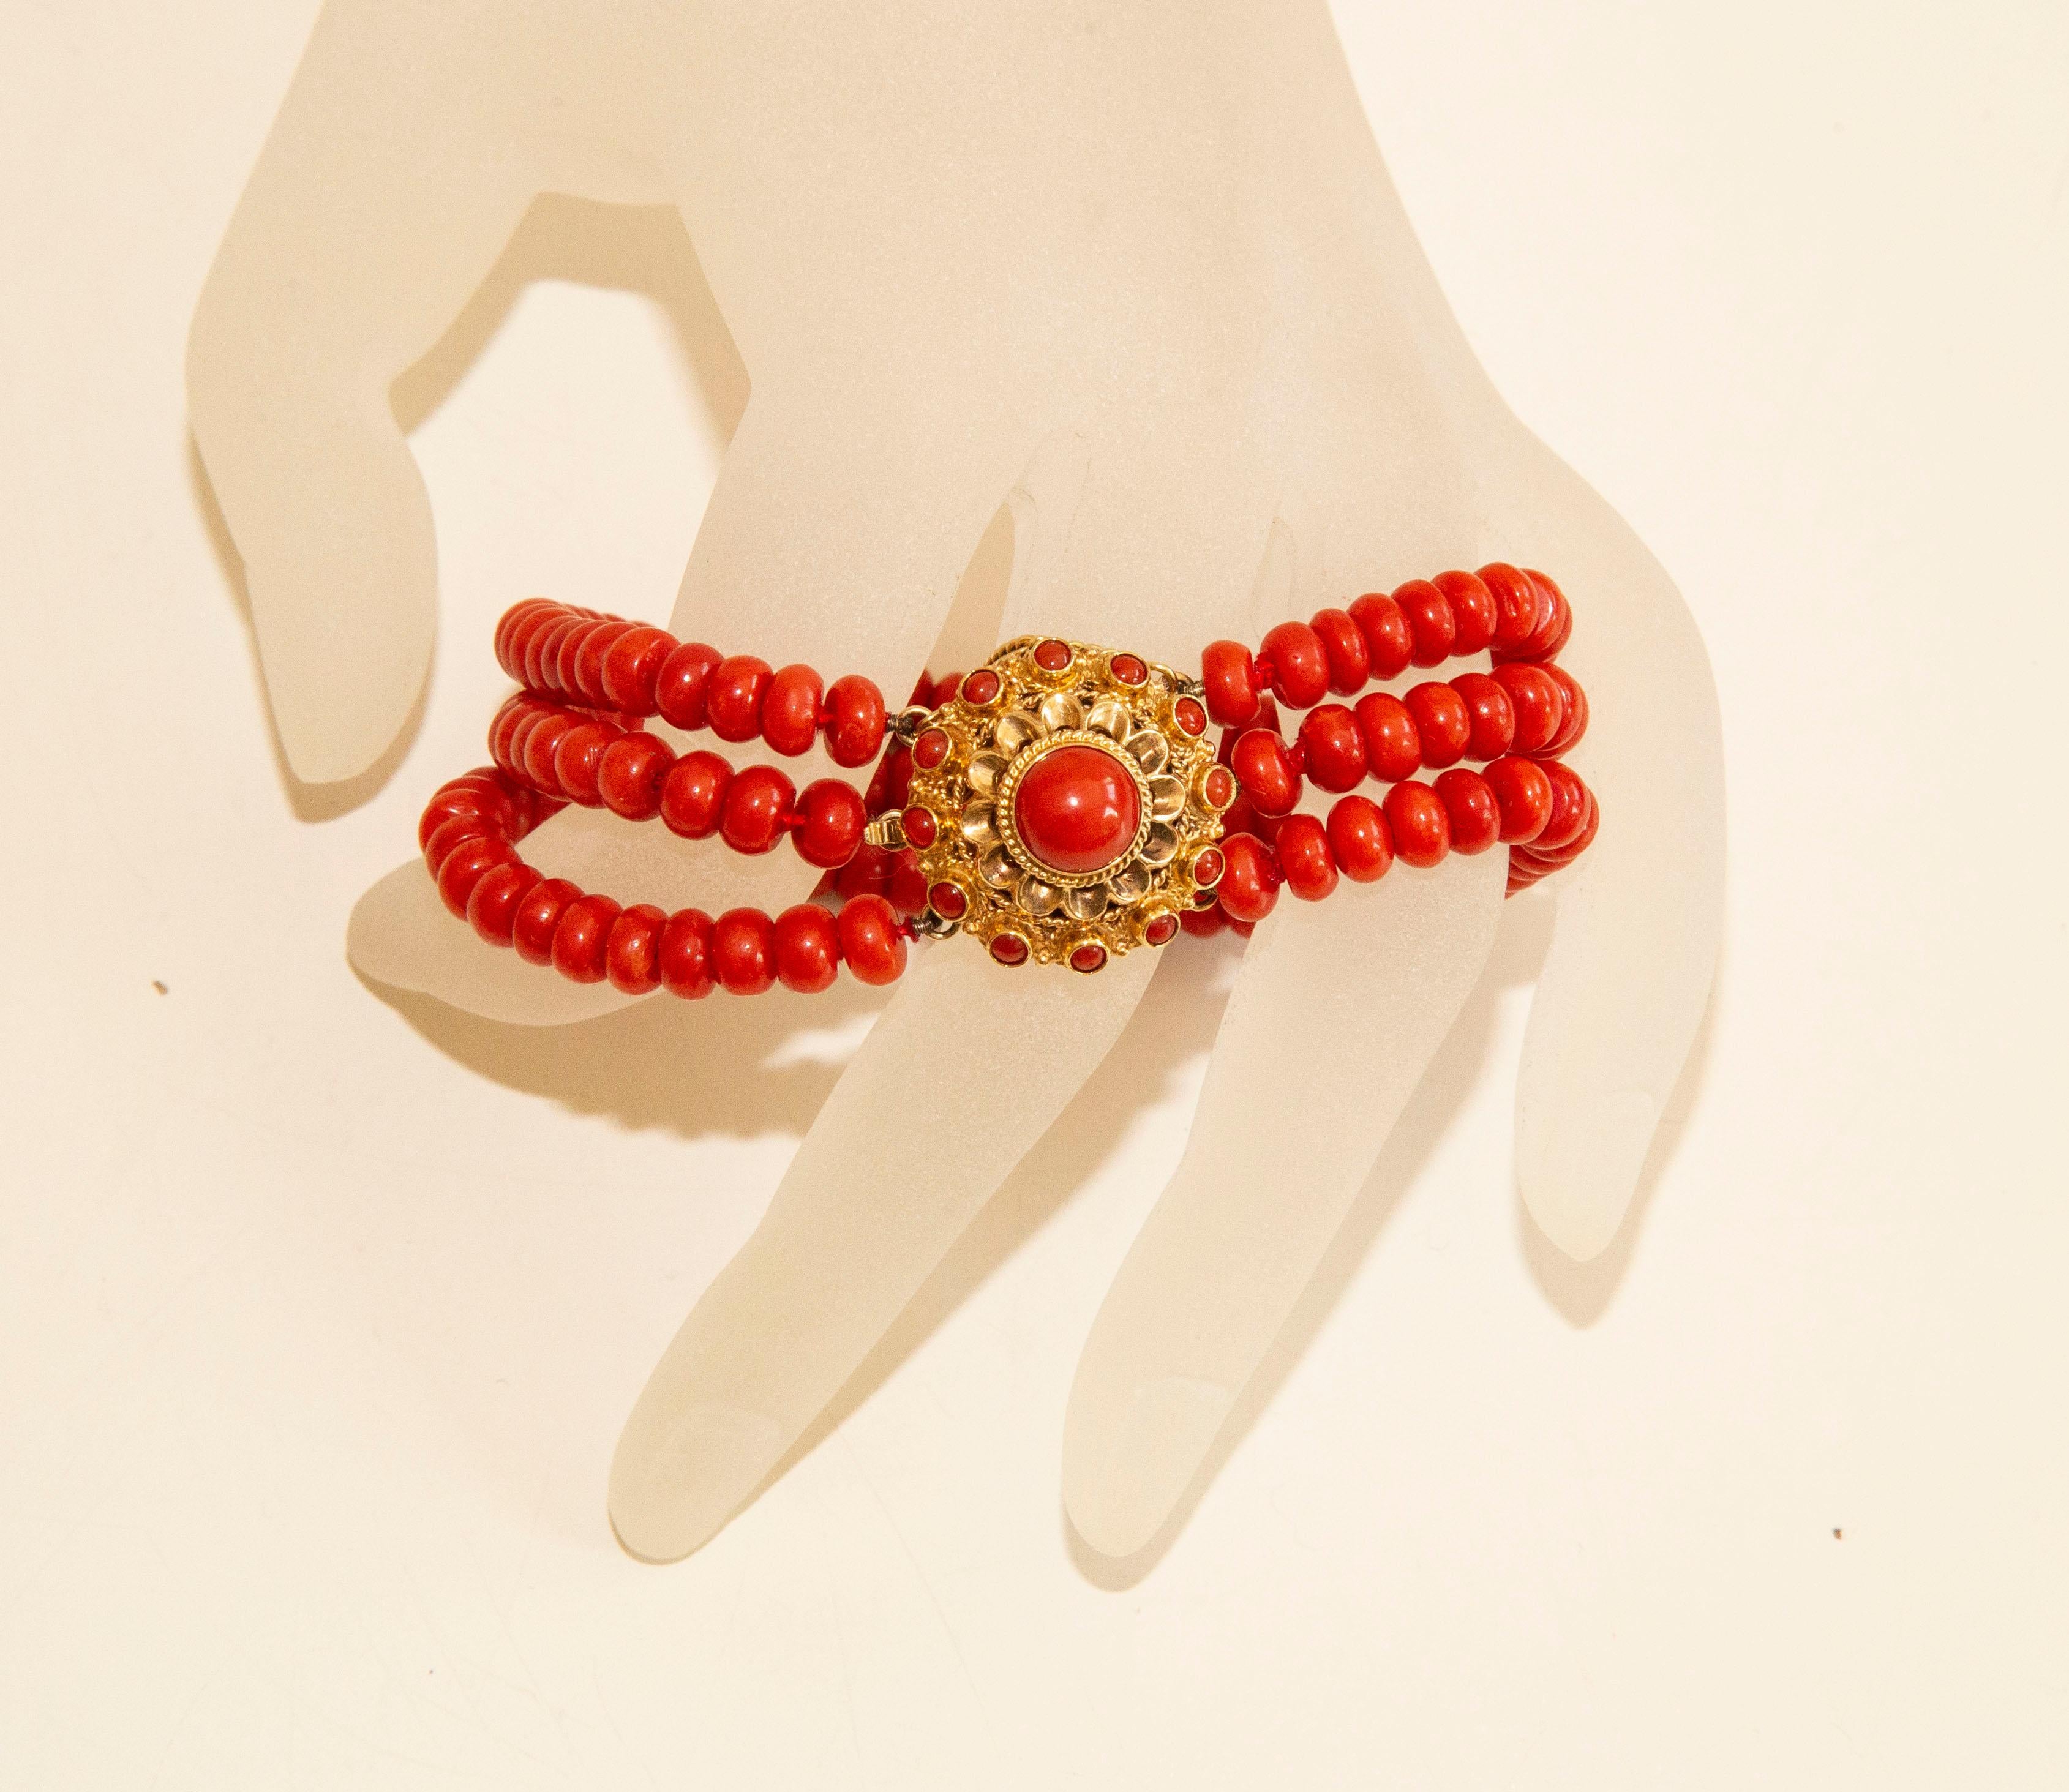 A vintage 3-row natural not dyed red coral bracelet with round filigree 14 karat yellow clasp with red coral cabochon in the centre and smaller beads on the periphery. The clasp features a 14k gold safety chain. The clasp is stamped with an oak leaf